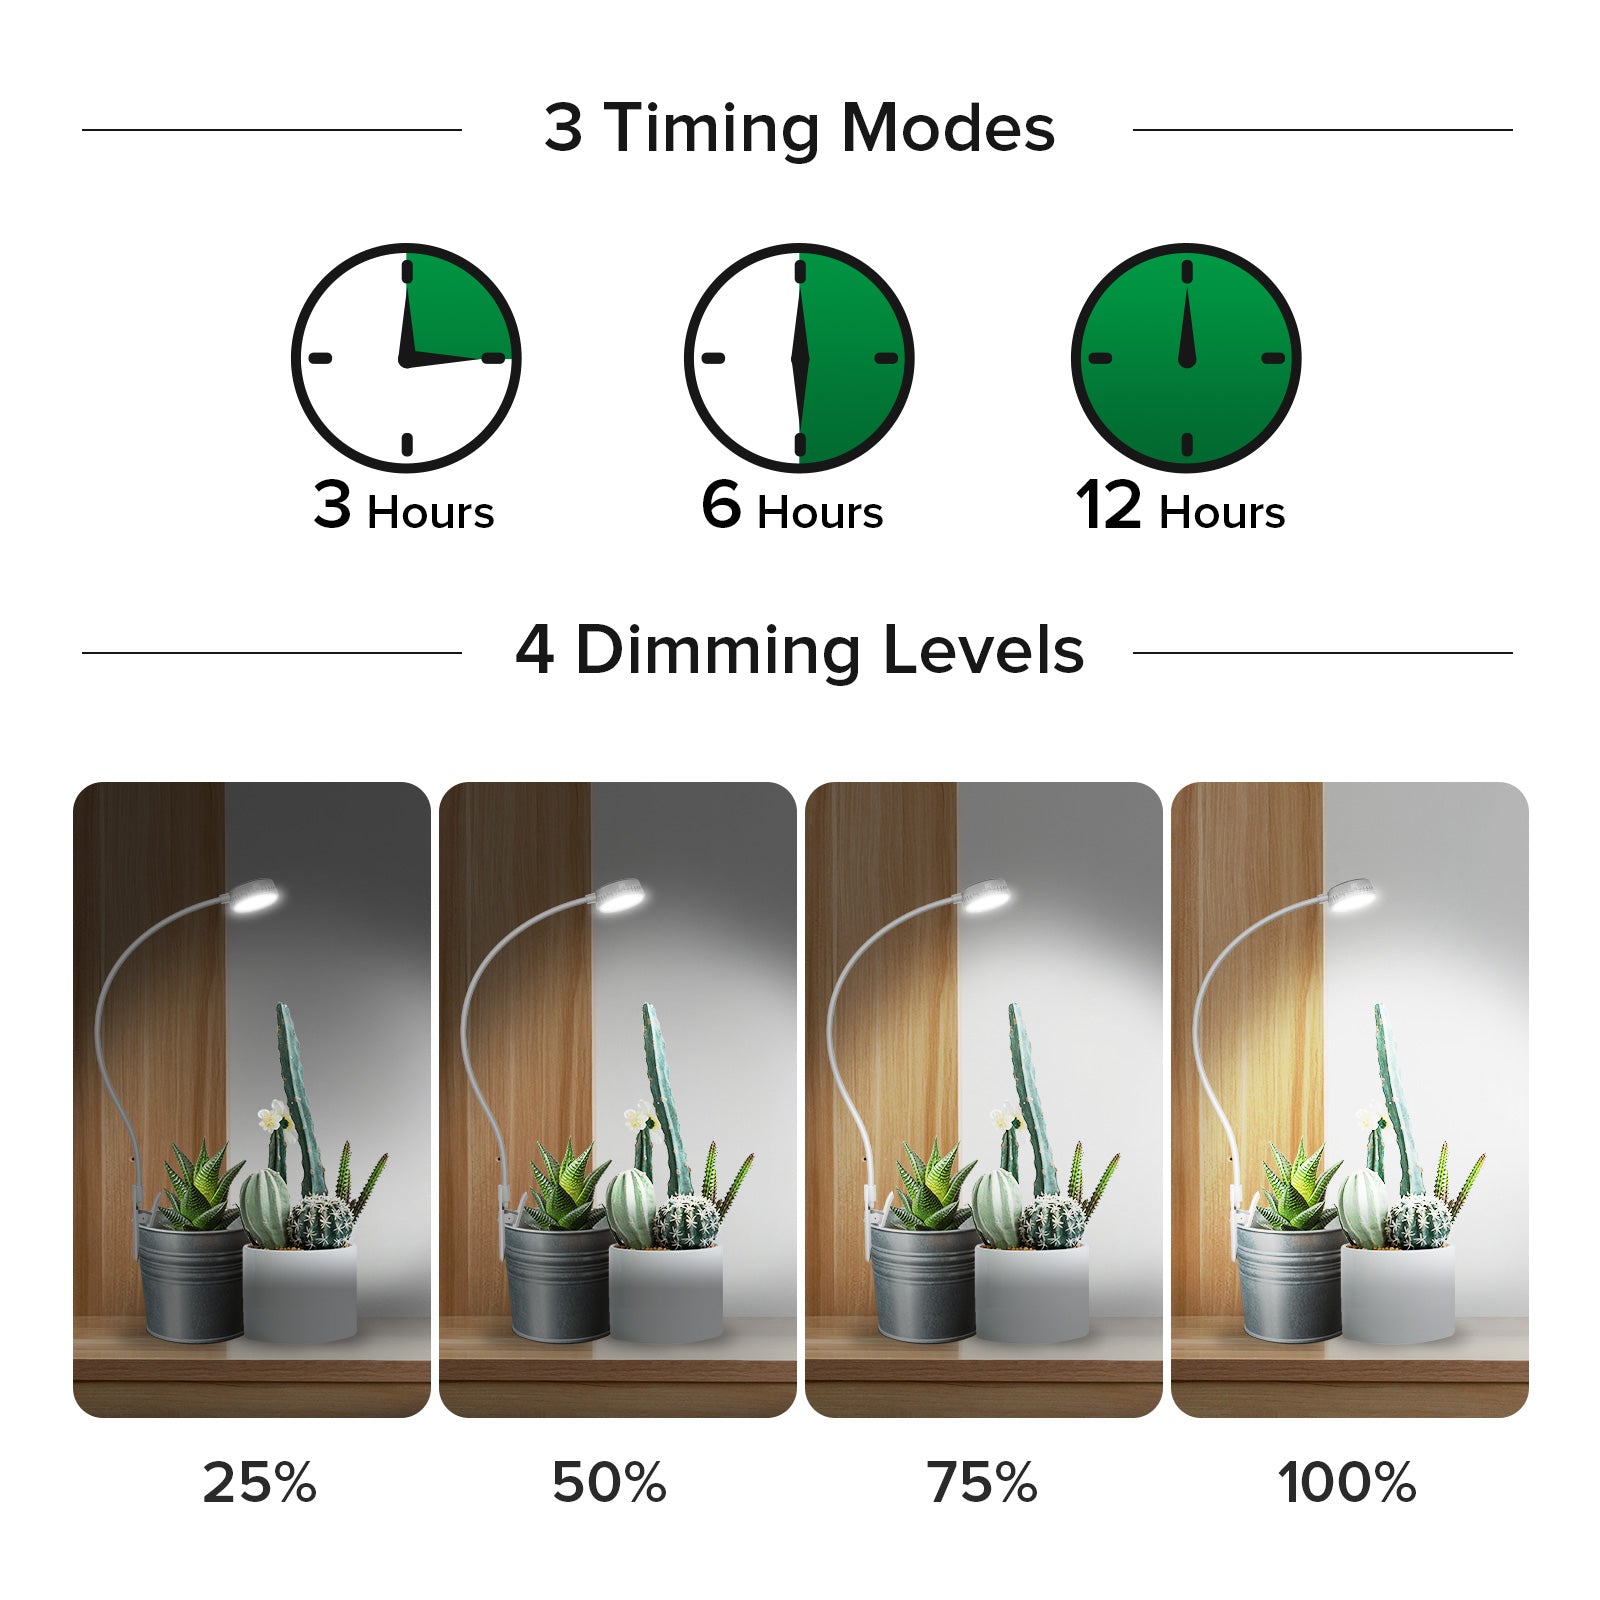 Pot Clip LED Grow Light(US ONLY) has 3 timing modes and 4 dimming levels.